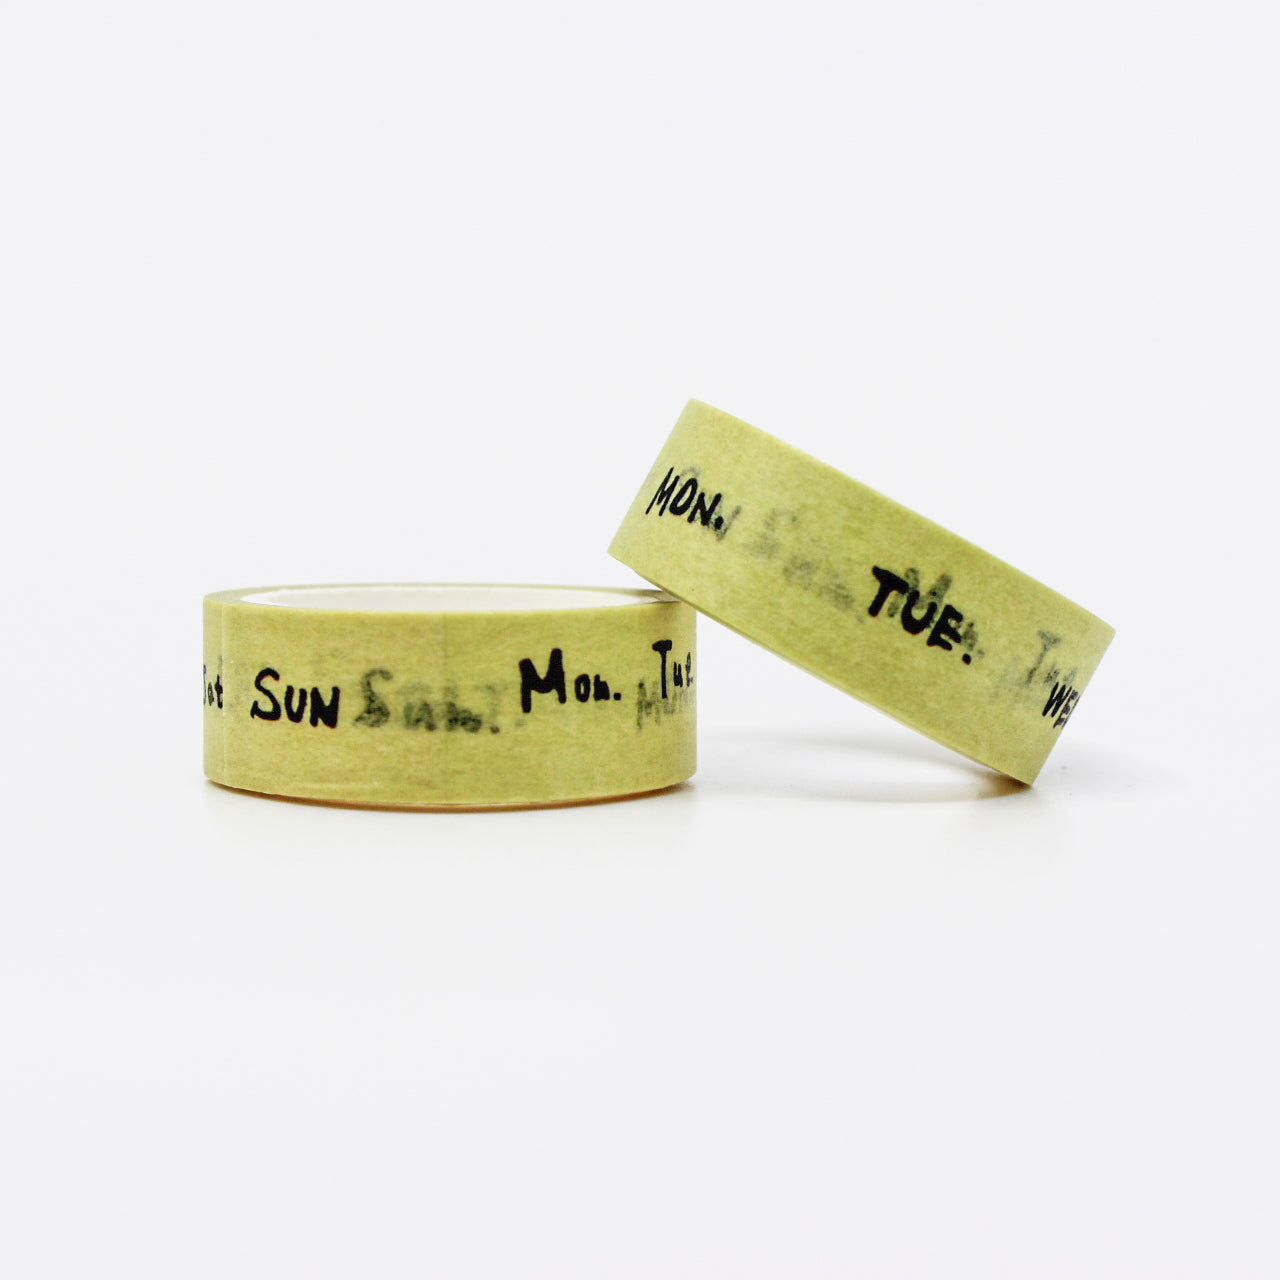 A vibrant Yellow Days of the Week Washi Tape featuring abbreviations for each day of the week. The tape adds a playful and organized touch to scheduling and planning, providing a pop of cheerful color to your planner or calendar. This tape is sold exclusively at BBB Supplies Craft Shop.